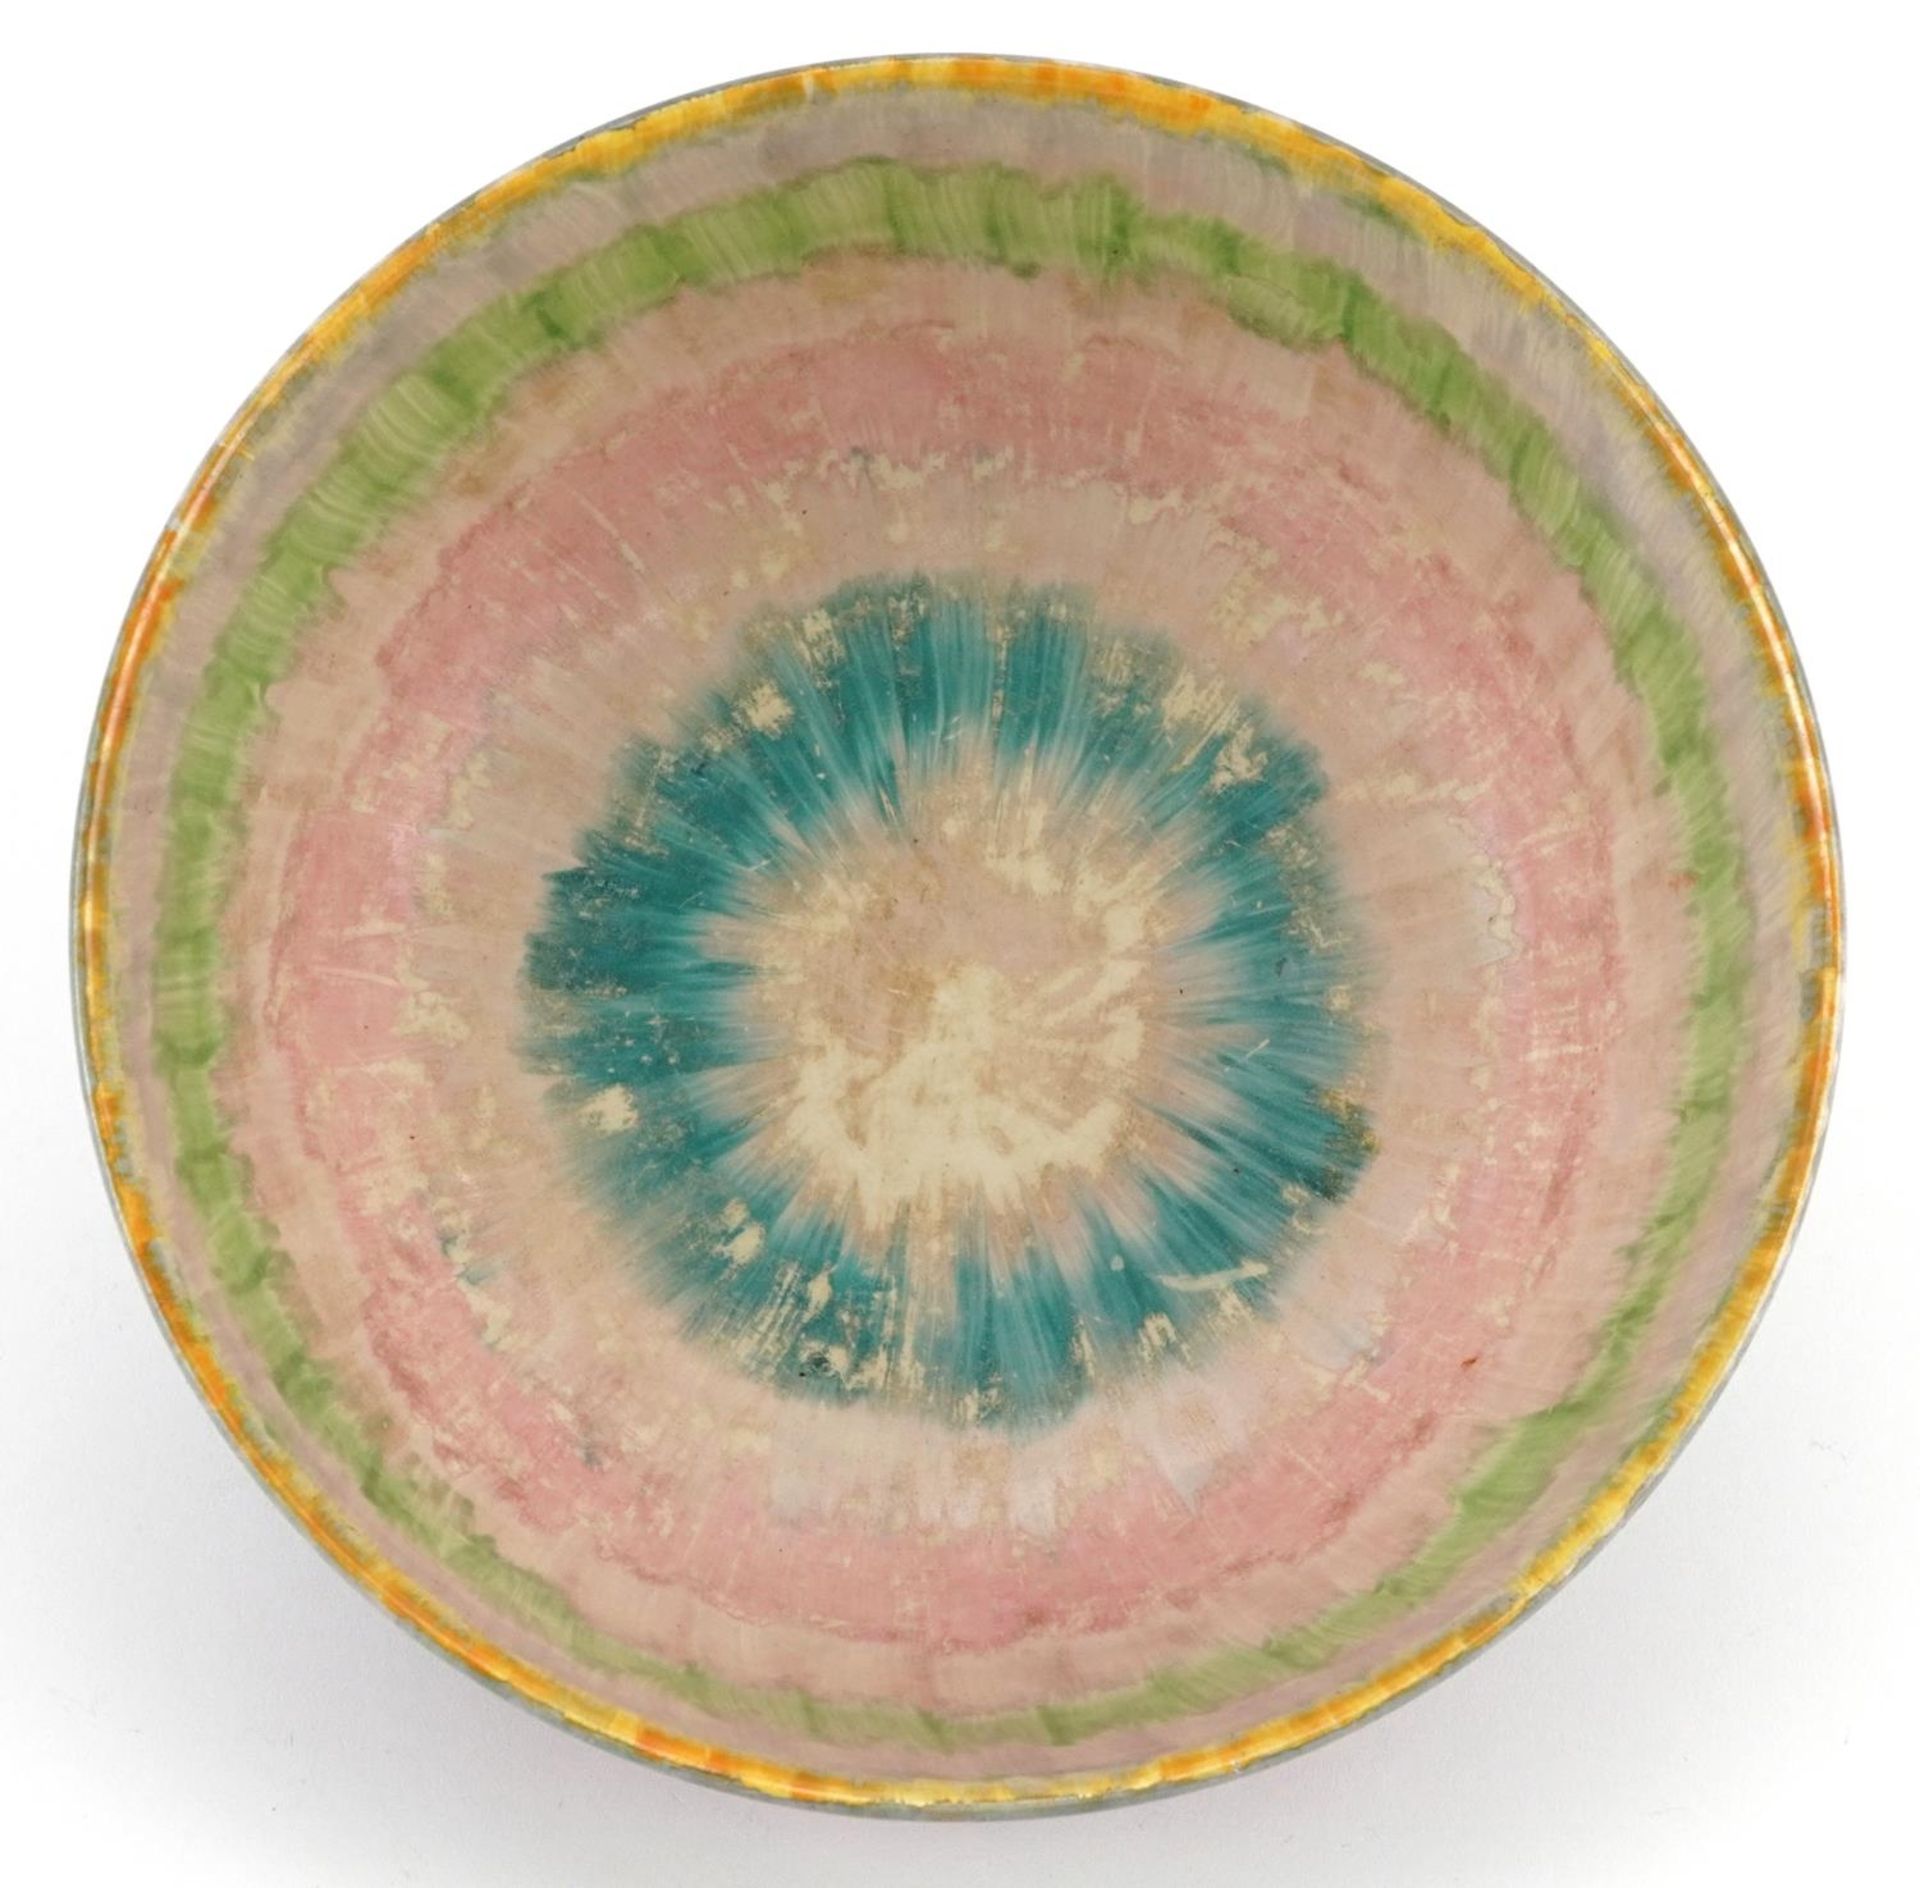 Clarice Cliff, Art Deco Bizarre bowl, numbered 6394 to the base, 20cm in diameter - Image 3 of 4